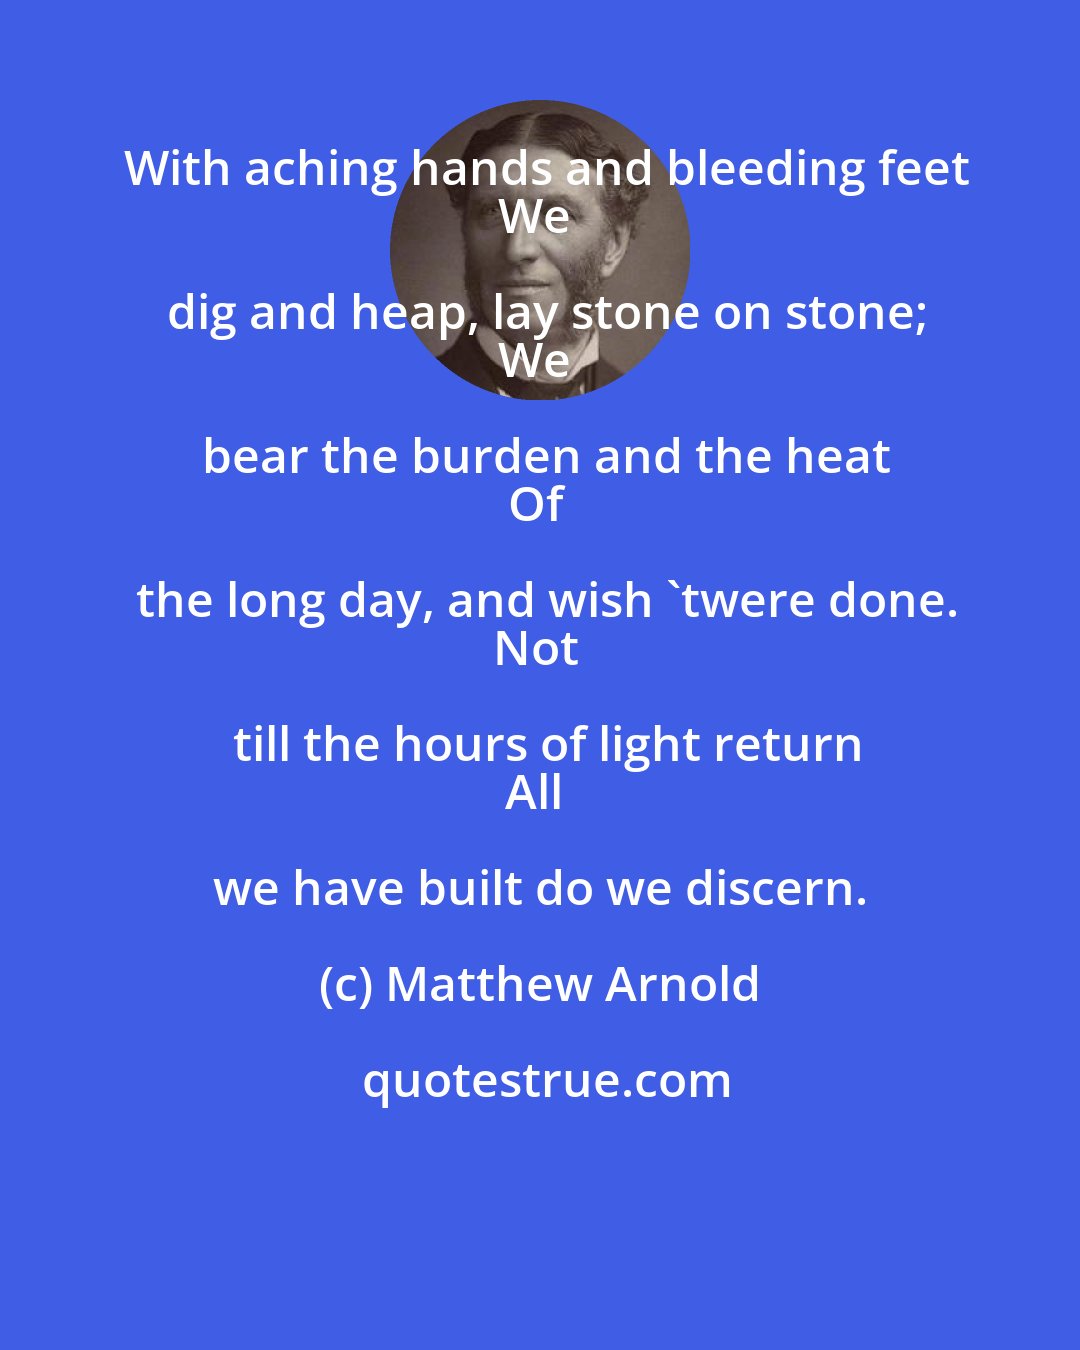 Matthew Arnold: With aching hands and bleeding feet
We dig and heap, lay stone on stone;
We bear the burden and the heat
Of the long day, and wish 'twere done.
Not till the hours of light return
All we have built do we discern.